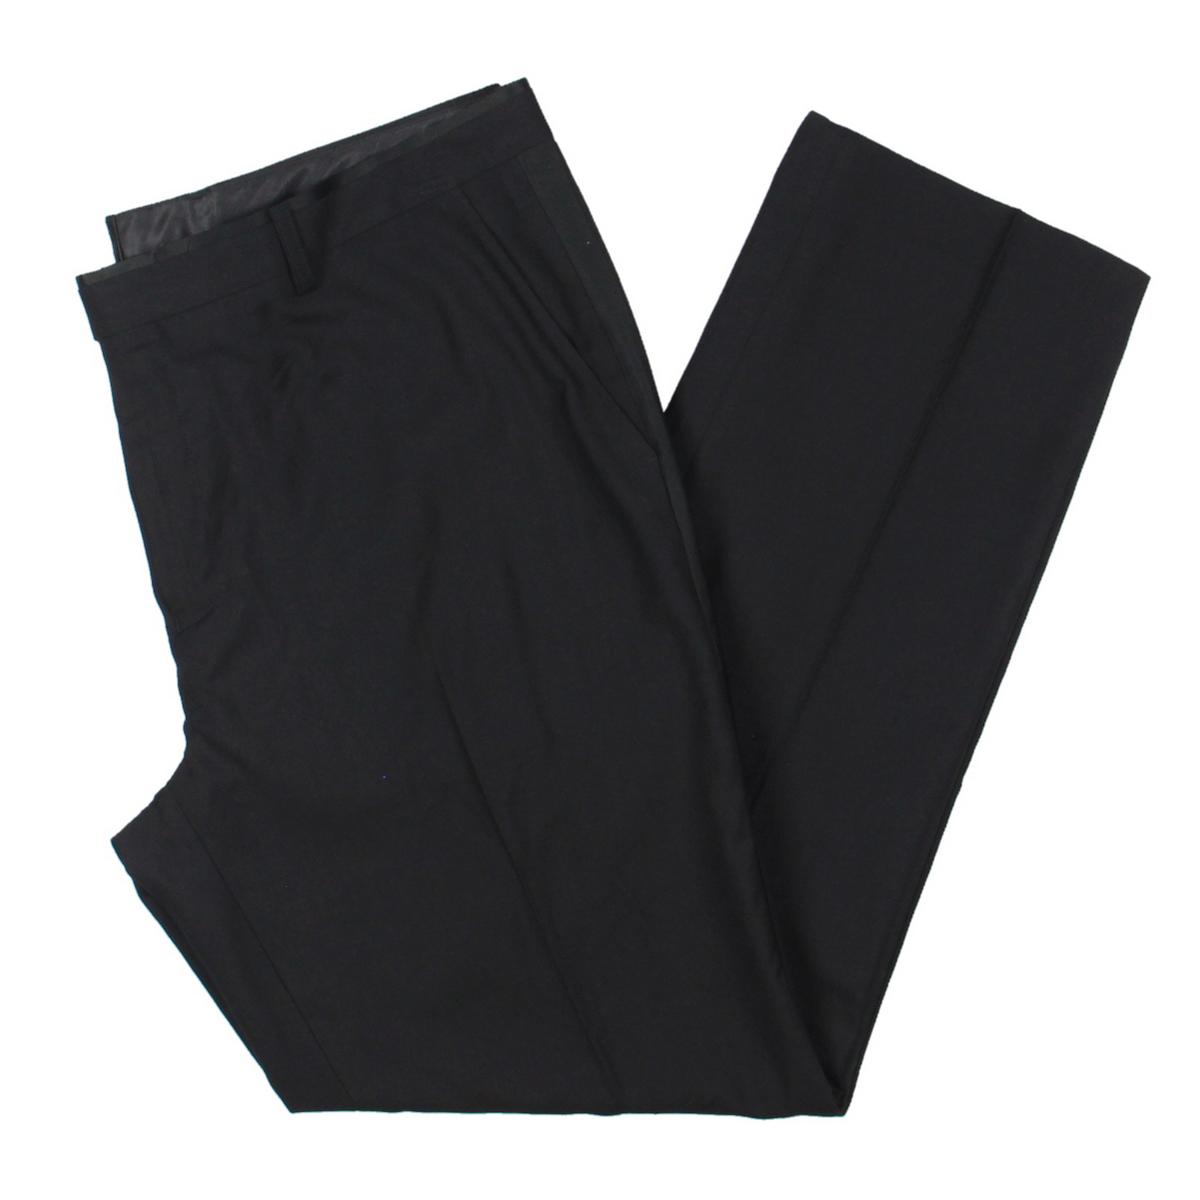 The Men's Store Mens Tailored Fit Work Wear Straight Leg Pants